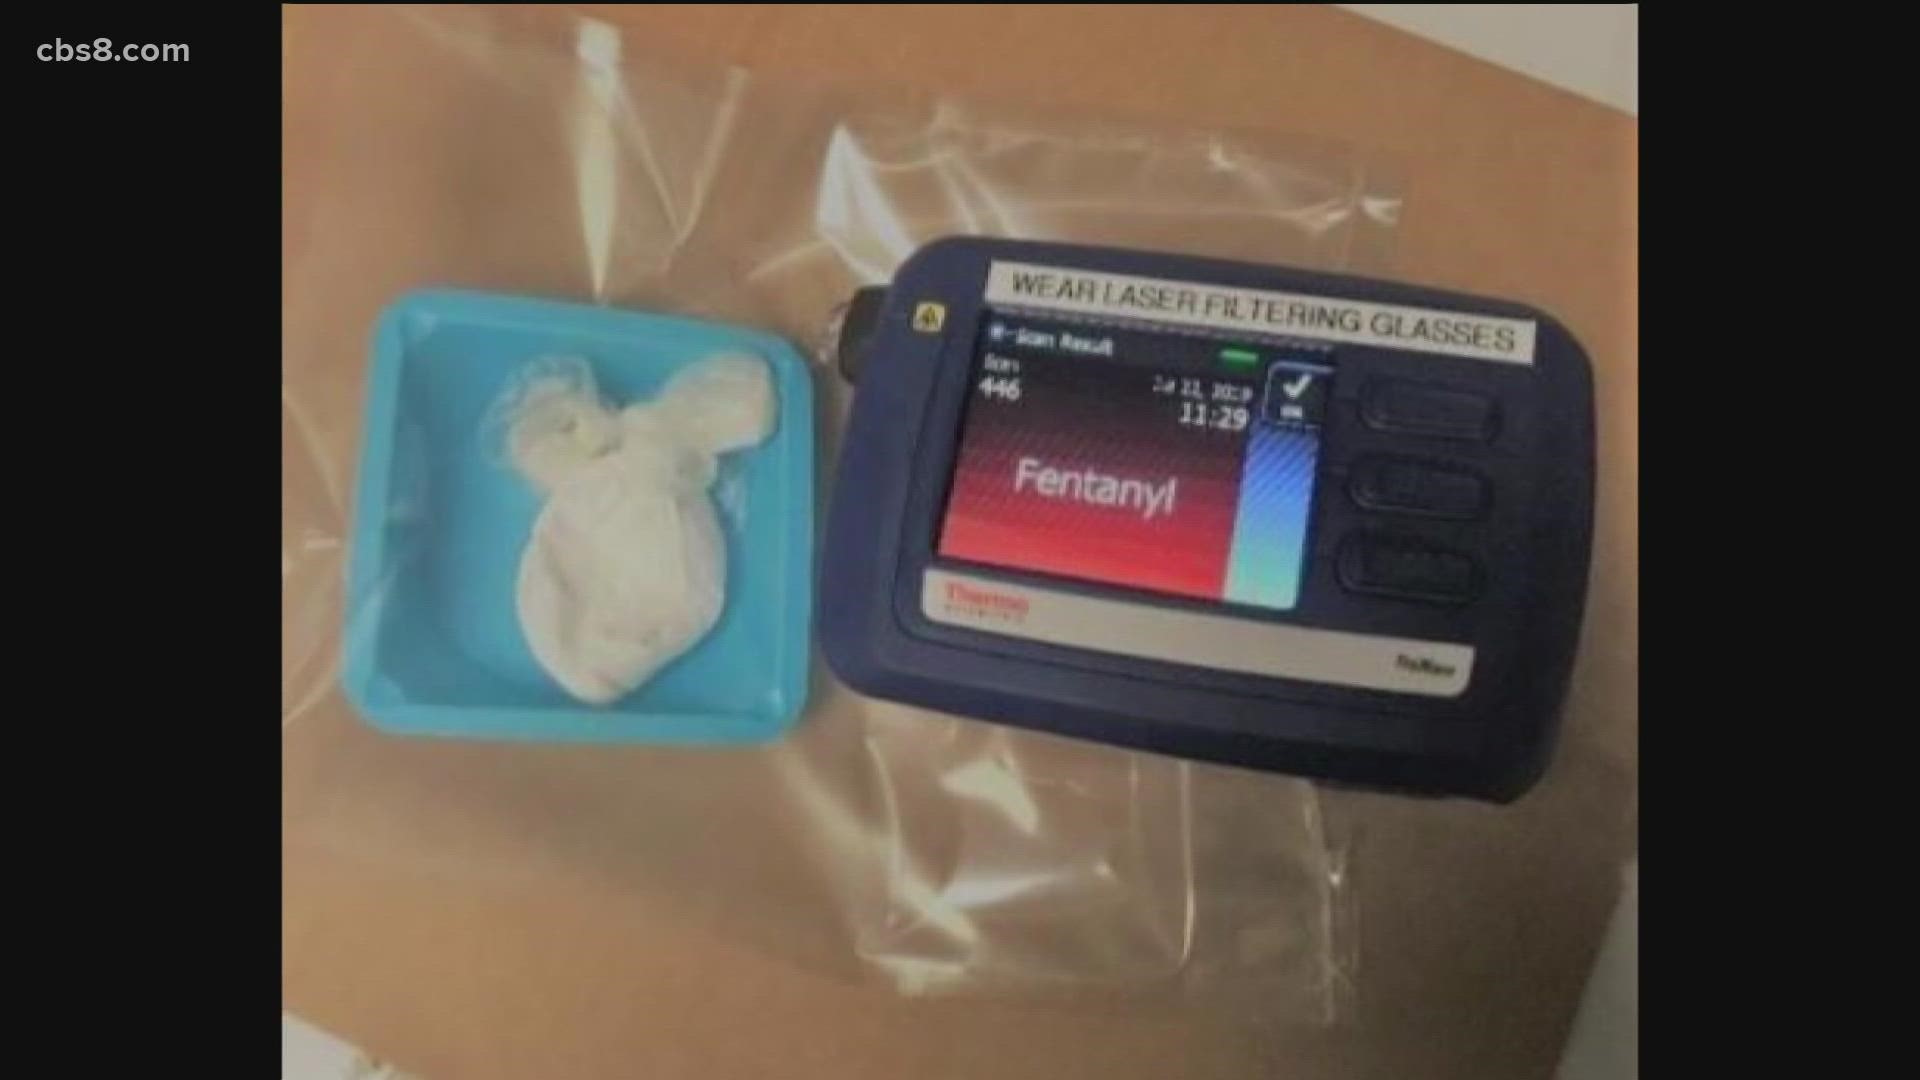 Medical toxicologist doubts overdoses can occur by accidental touch or airborne powder.